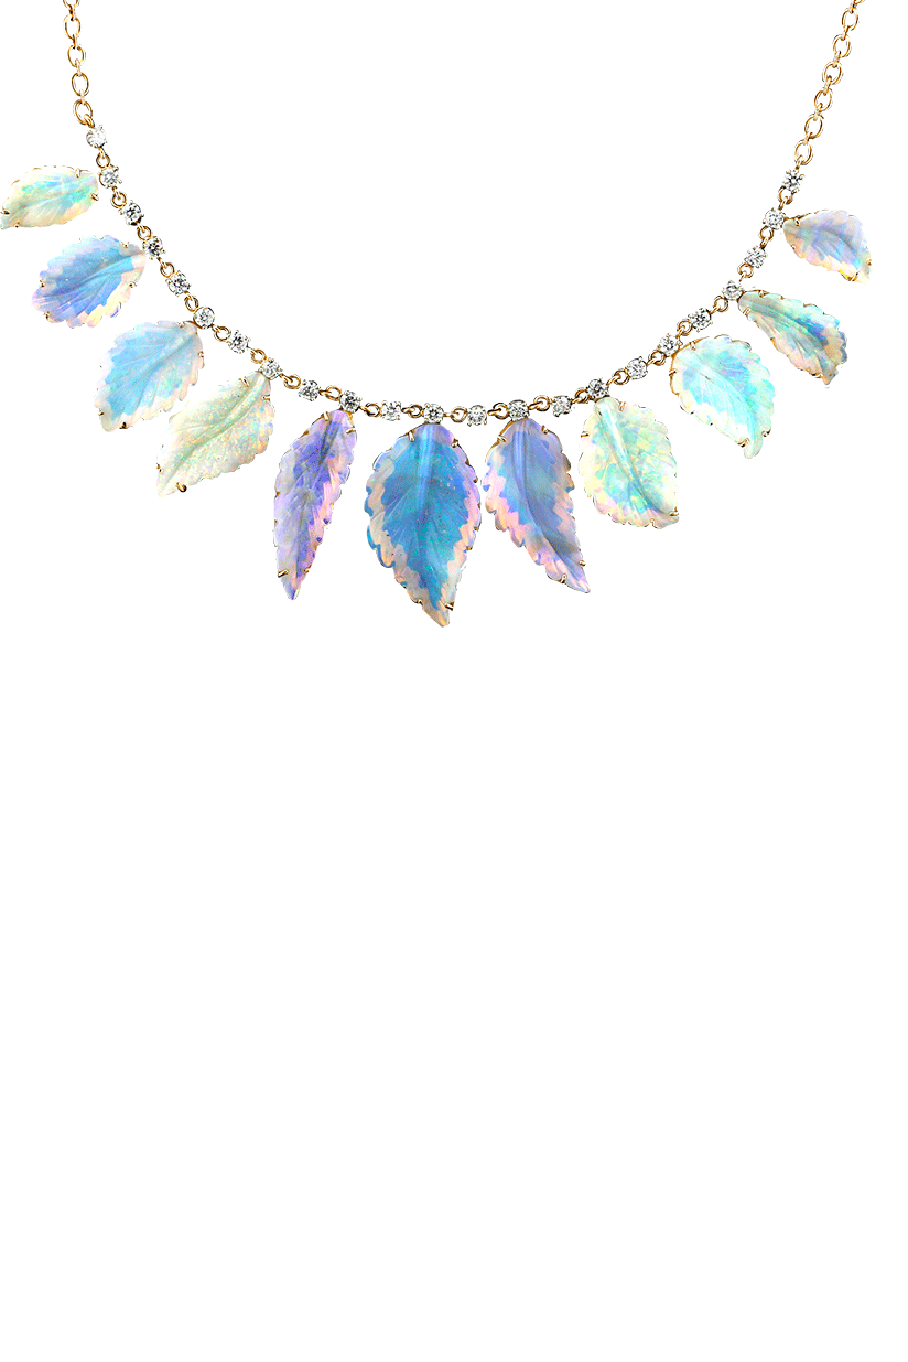 IRENE NEUWIRTH JEWELRY-Carved Opal Leaf Necklace-ROSE GOLD